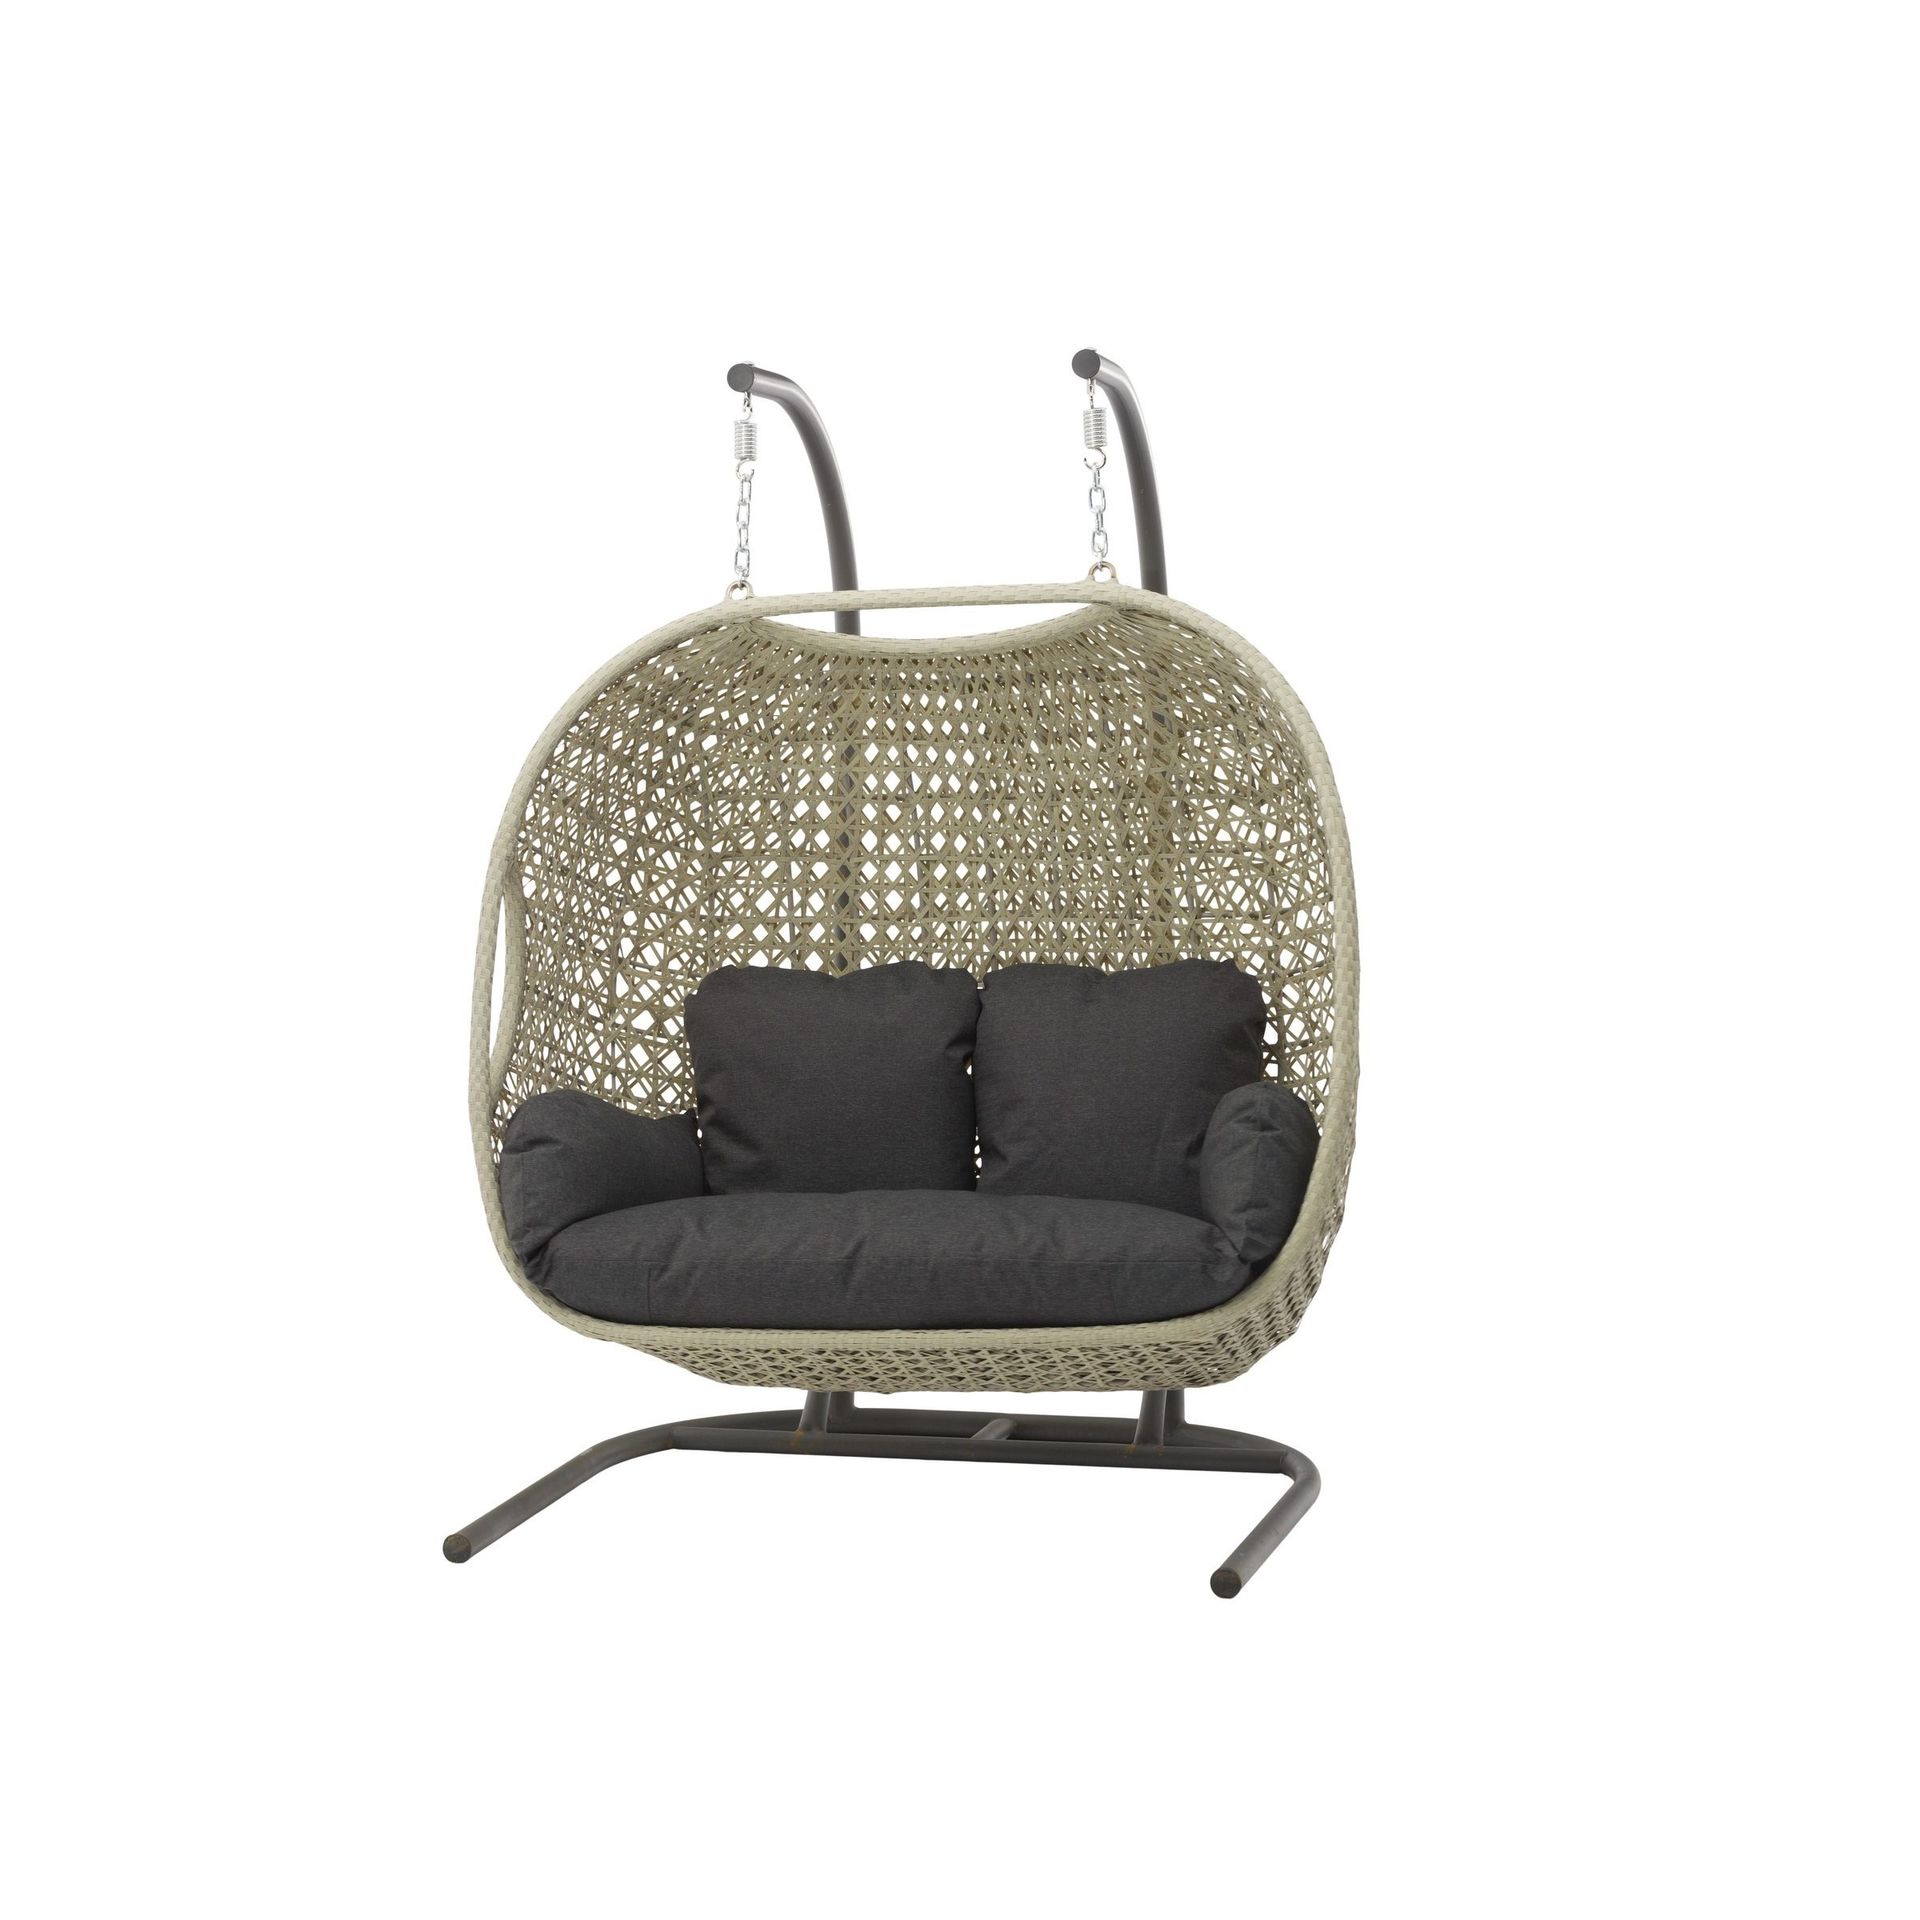 Chedworth Dove Grey Double Cocoon Chair